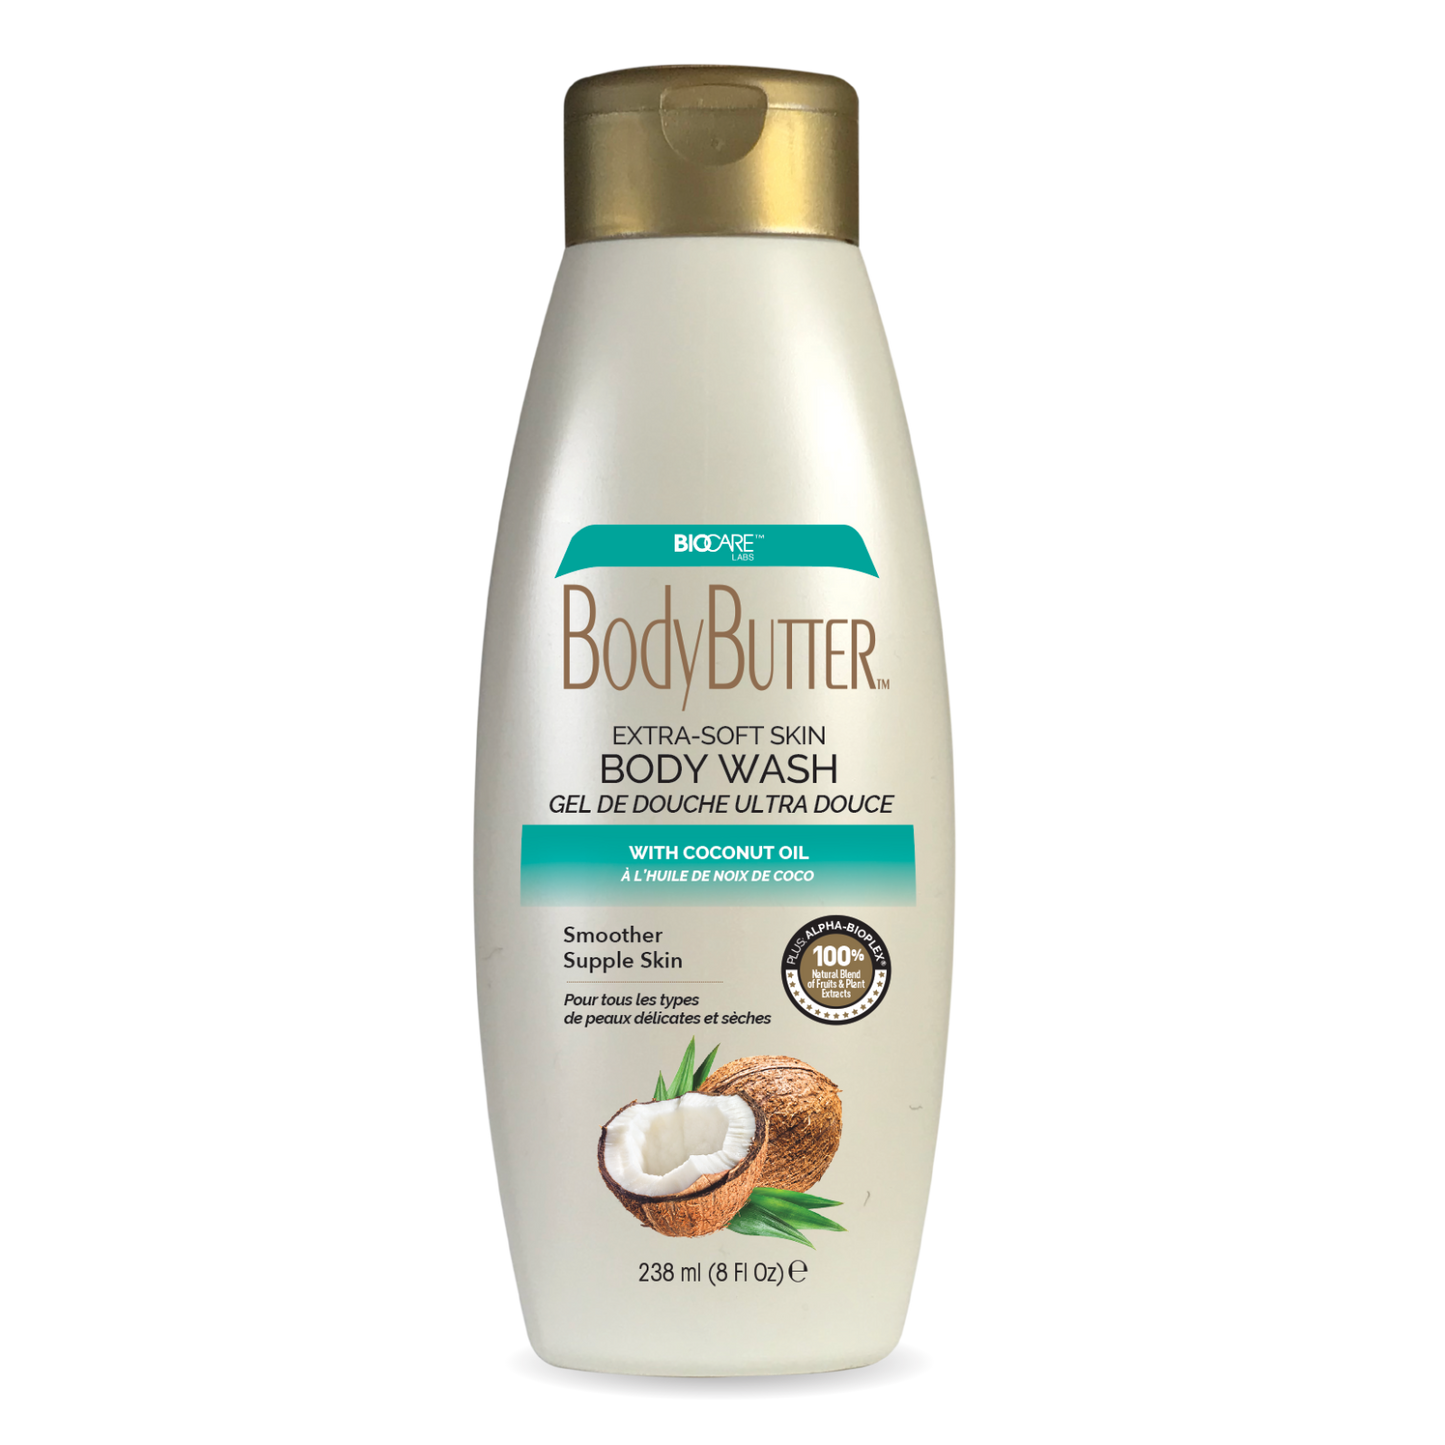 EXTRA-SOFT SKIN BODY WASH with COCONUT OIL